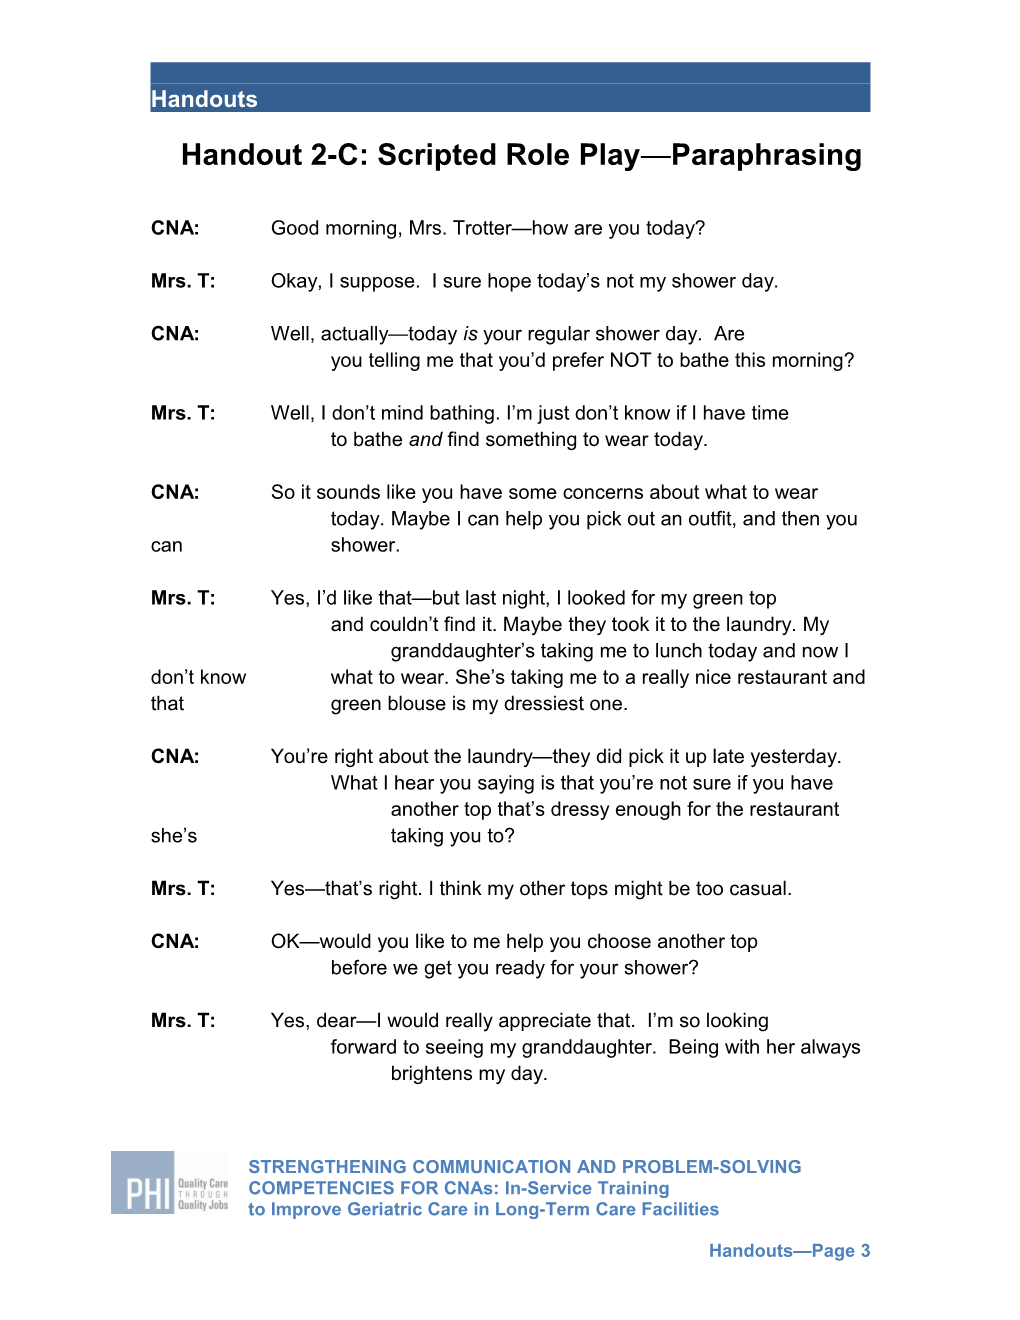 Handout 2-A: Overview of Paraphrasing